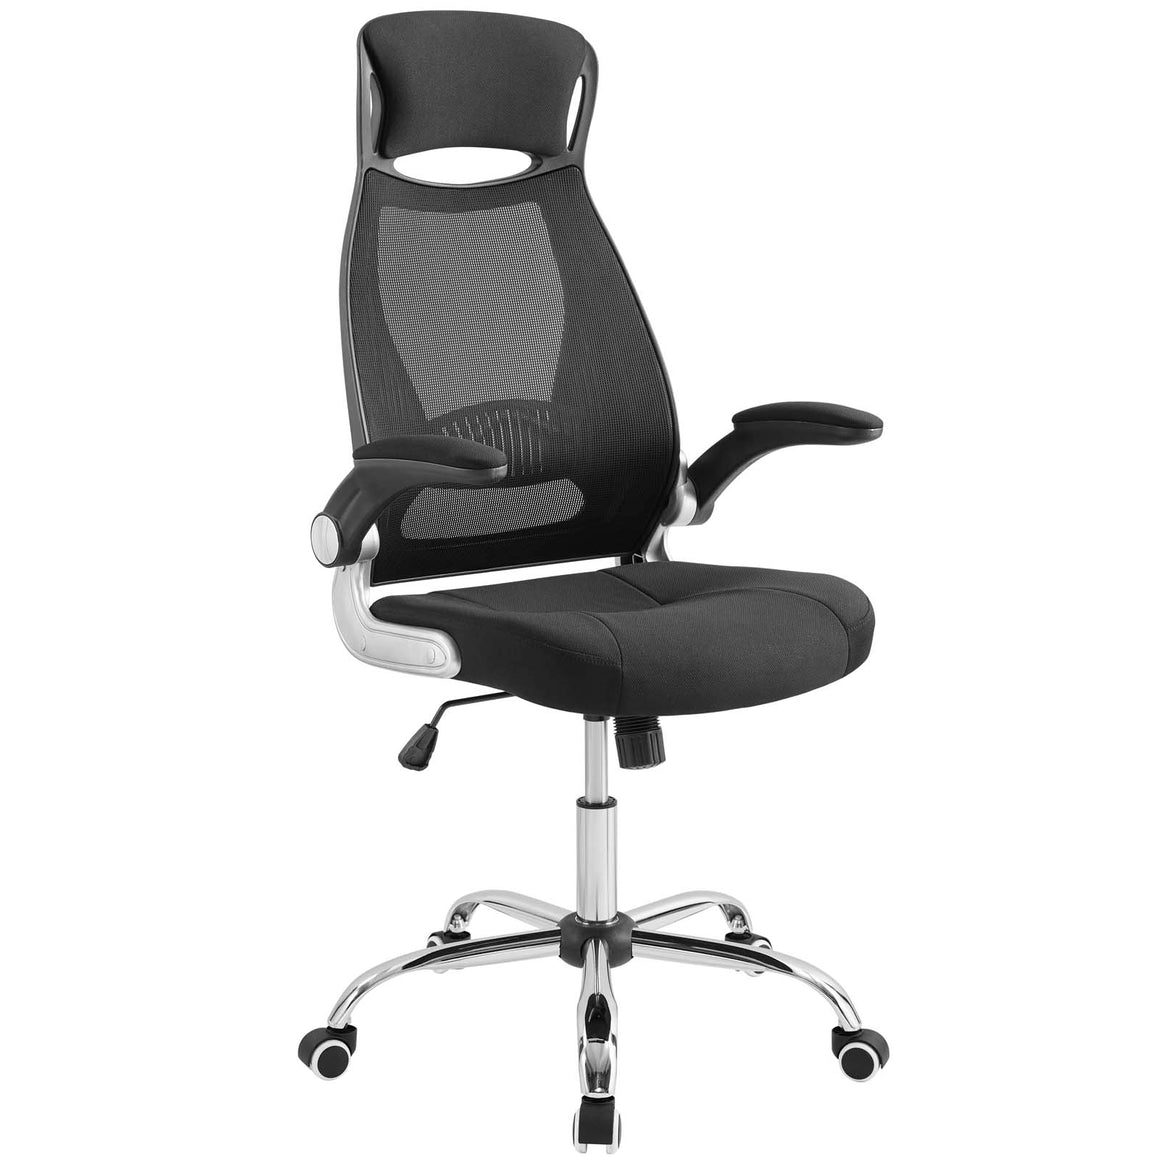 Expedite Highback Office Chair in Black